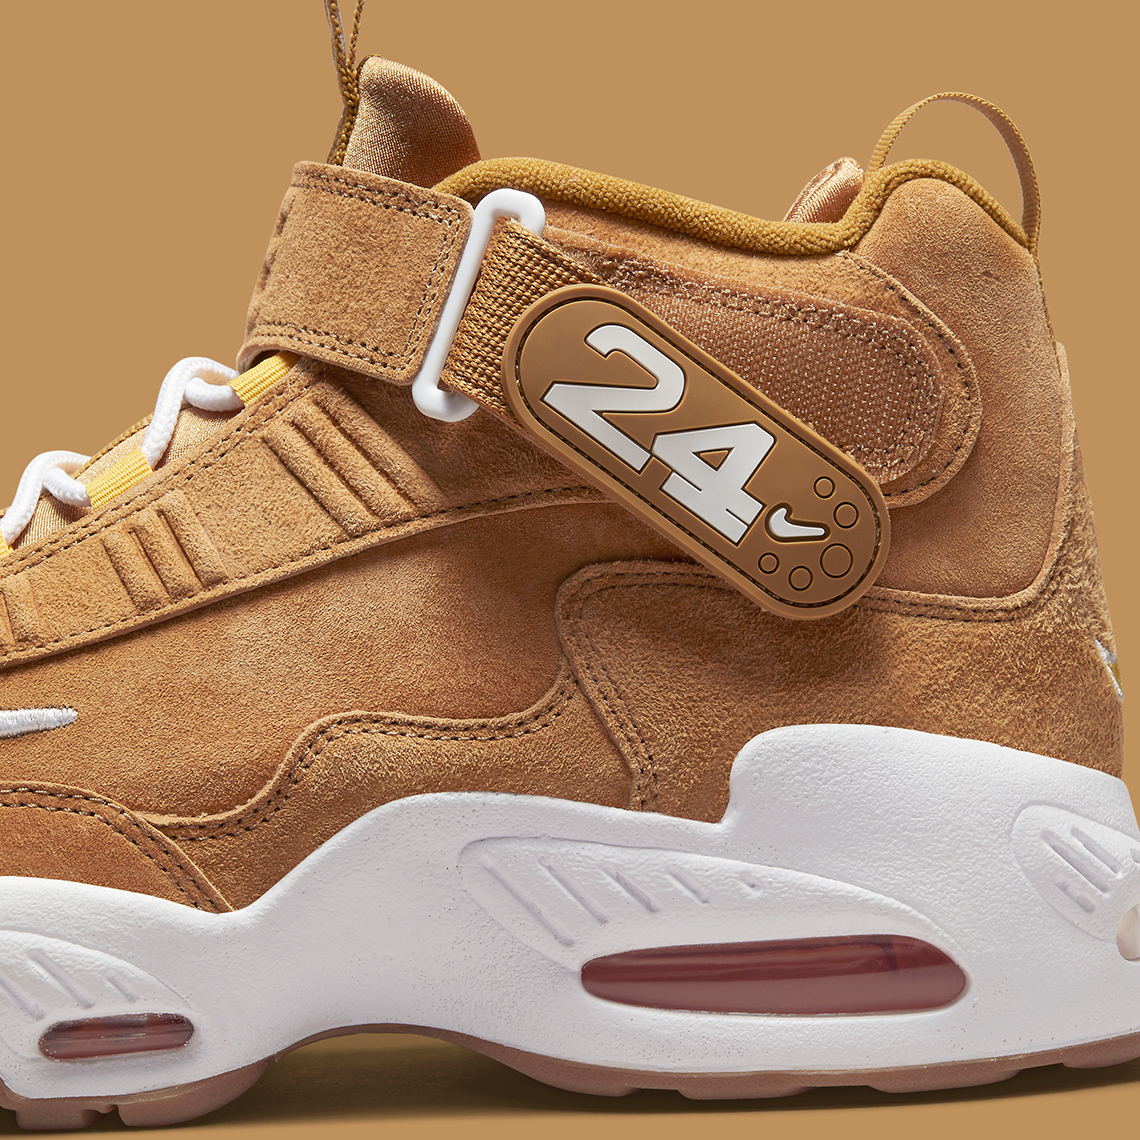 Nike Air Griffey Max 1 Wheat Do6684 700 Release Date 3